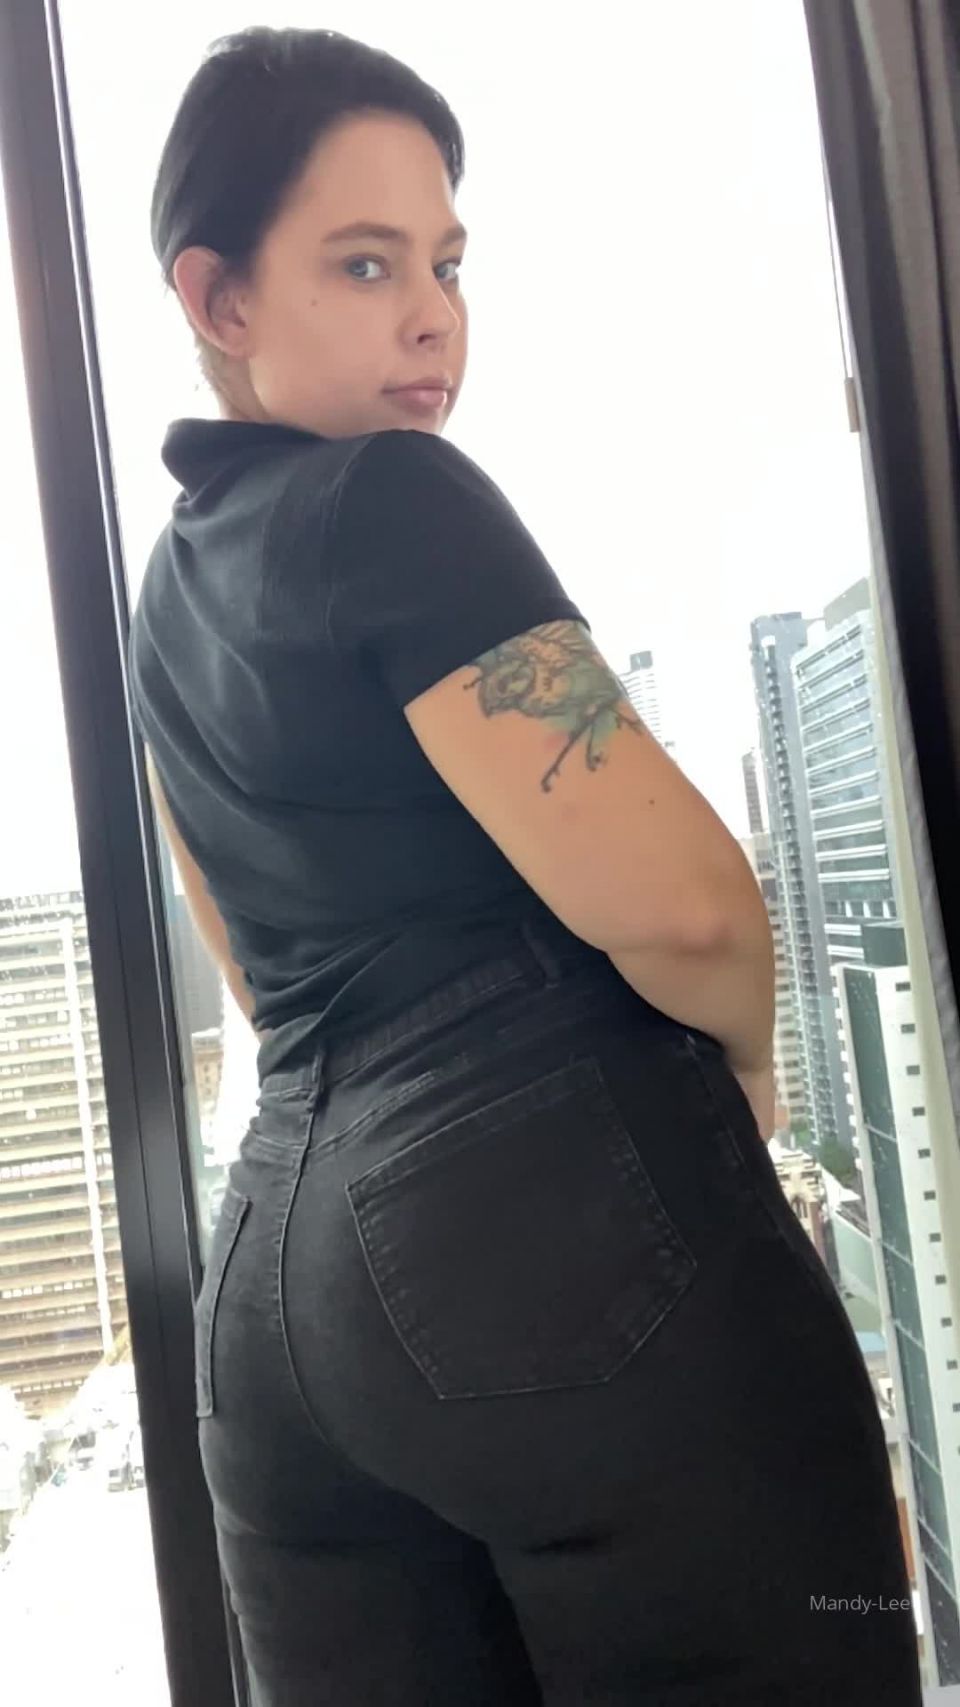 Mandy Lee () Mandylee - humpday how has your week been mine has been very wet and stormy which makes for poor 12-02-2020